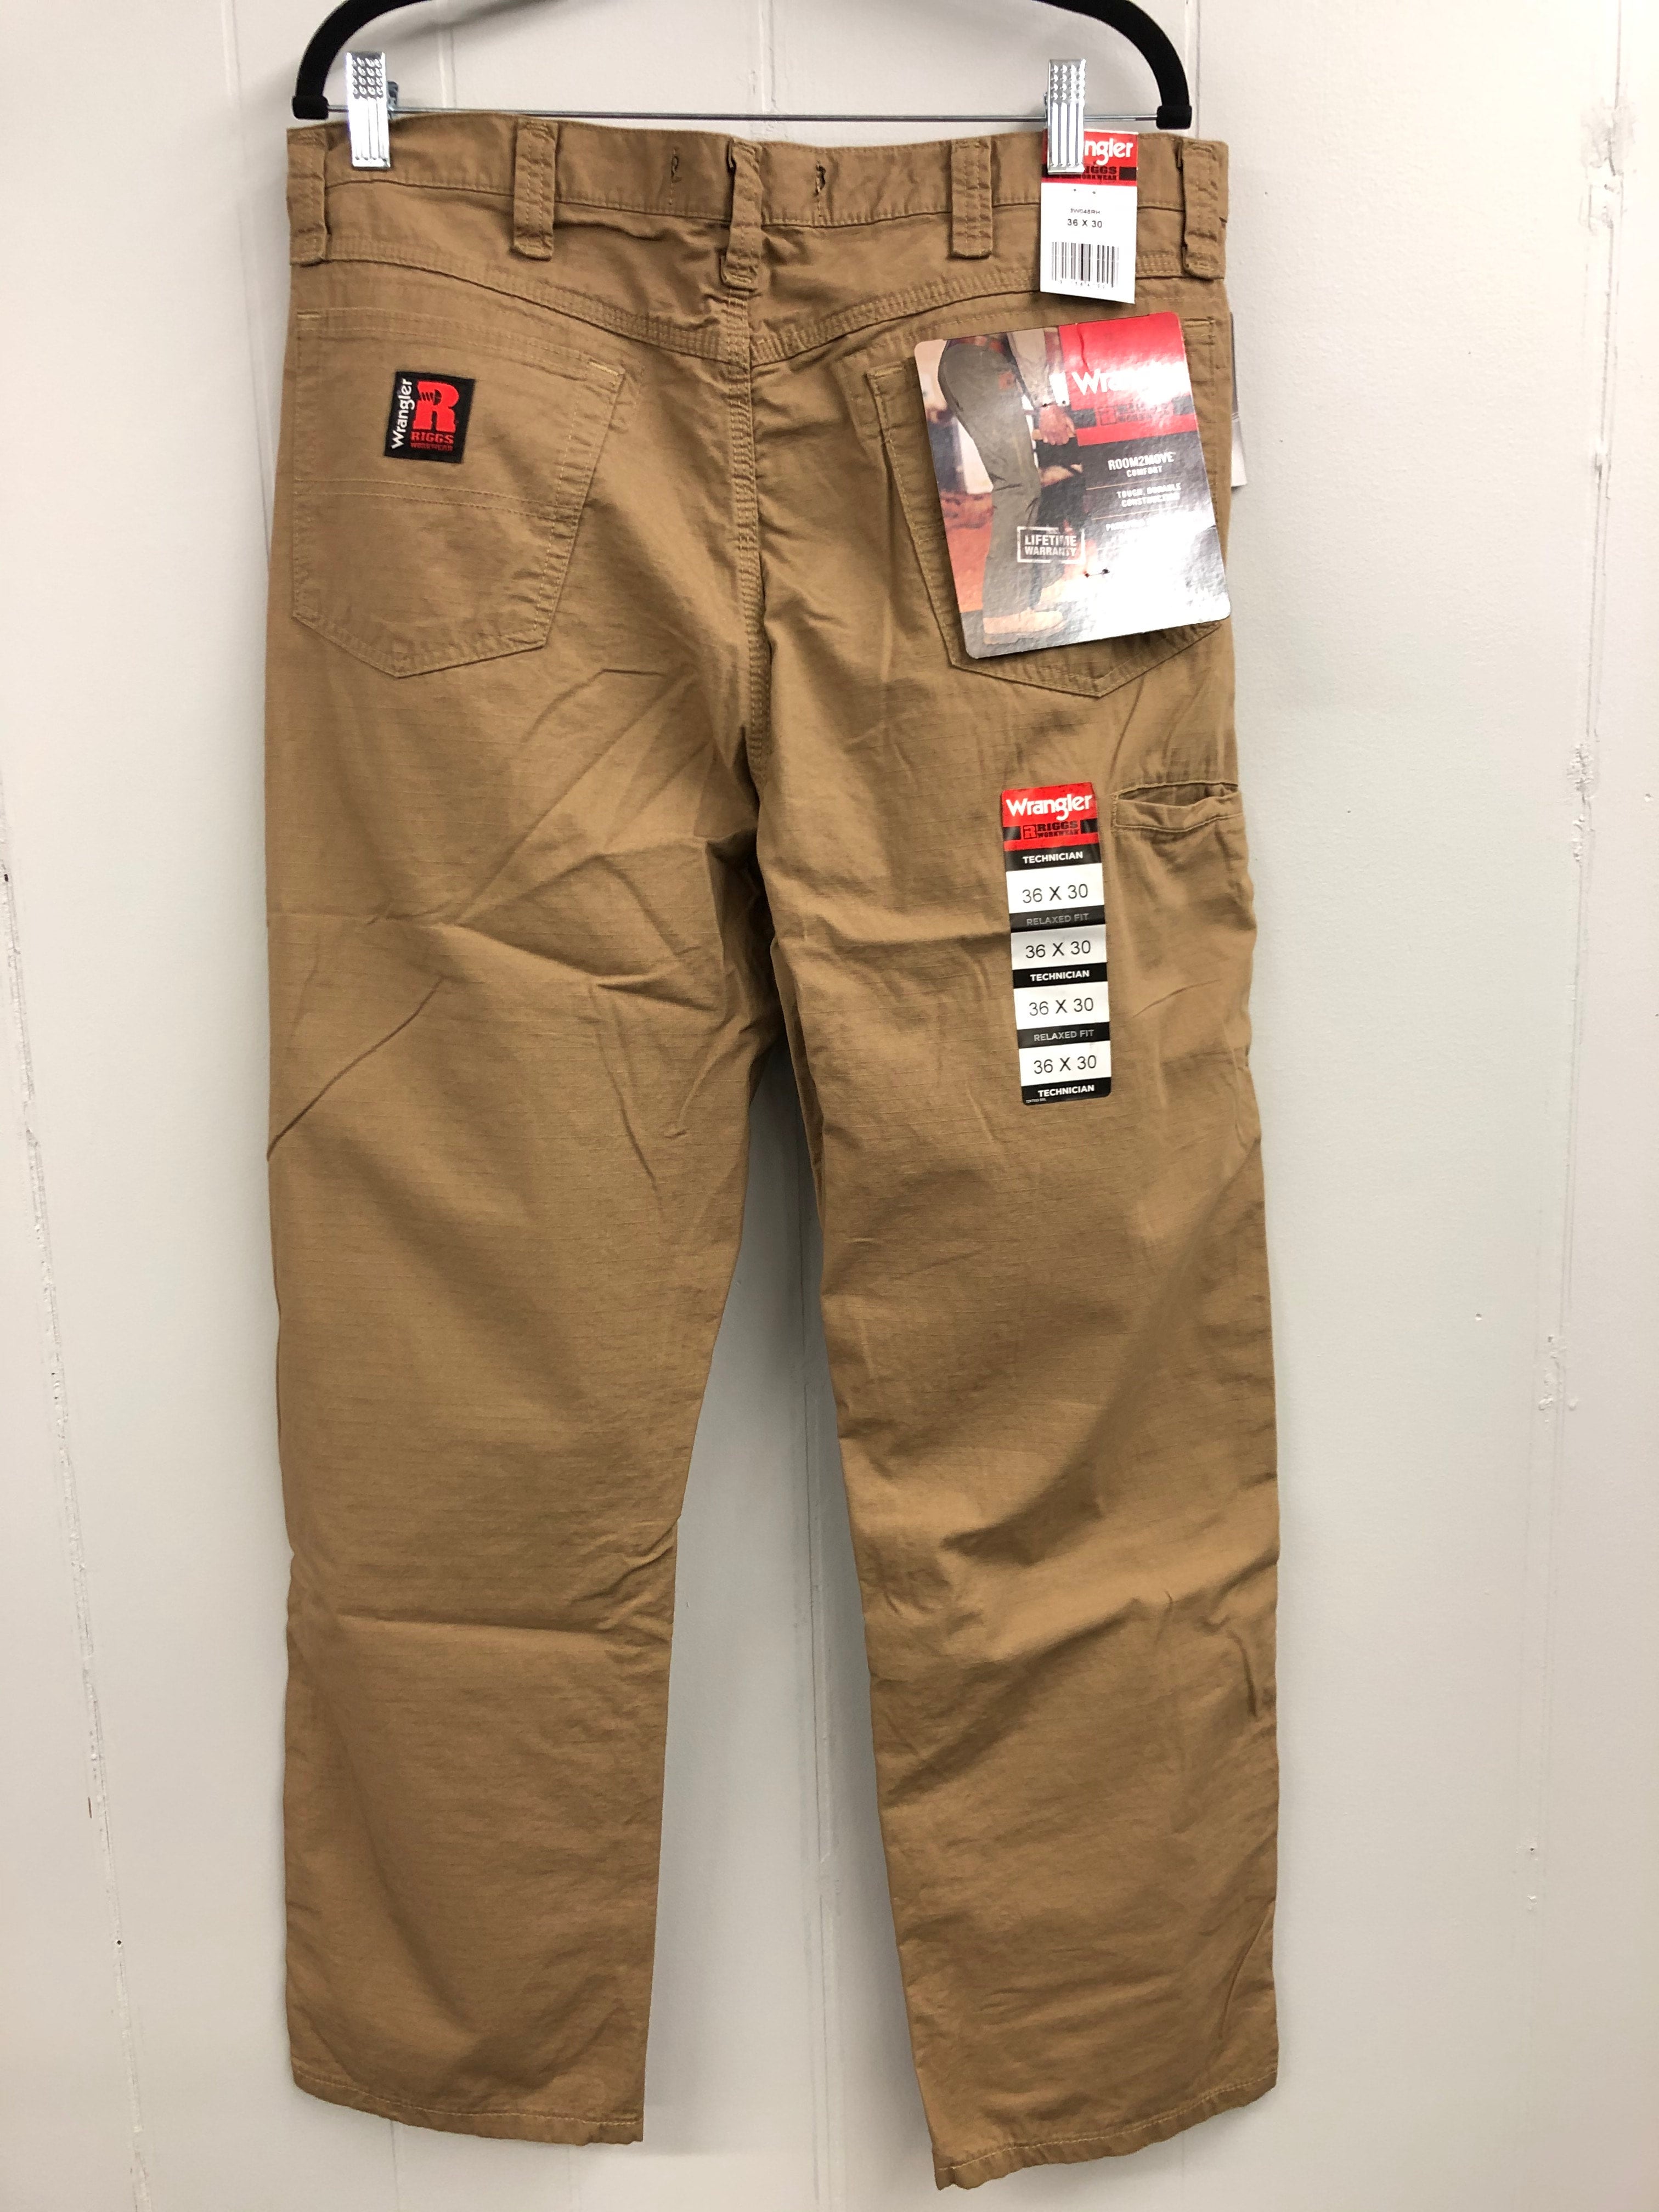 Is Carhartt the GOAT? : r/Carpentry